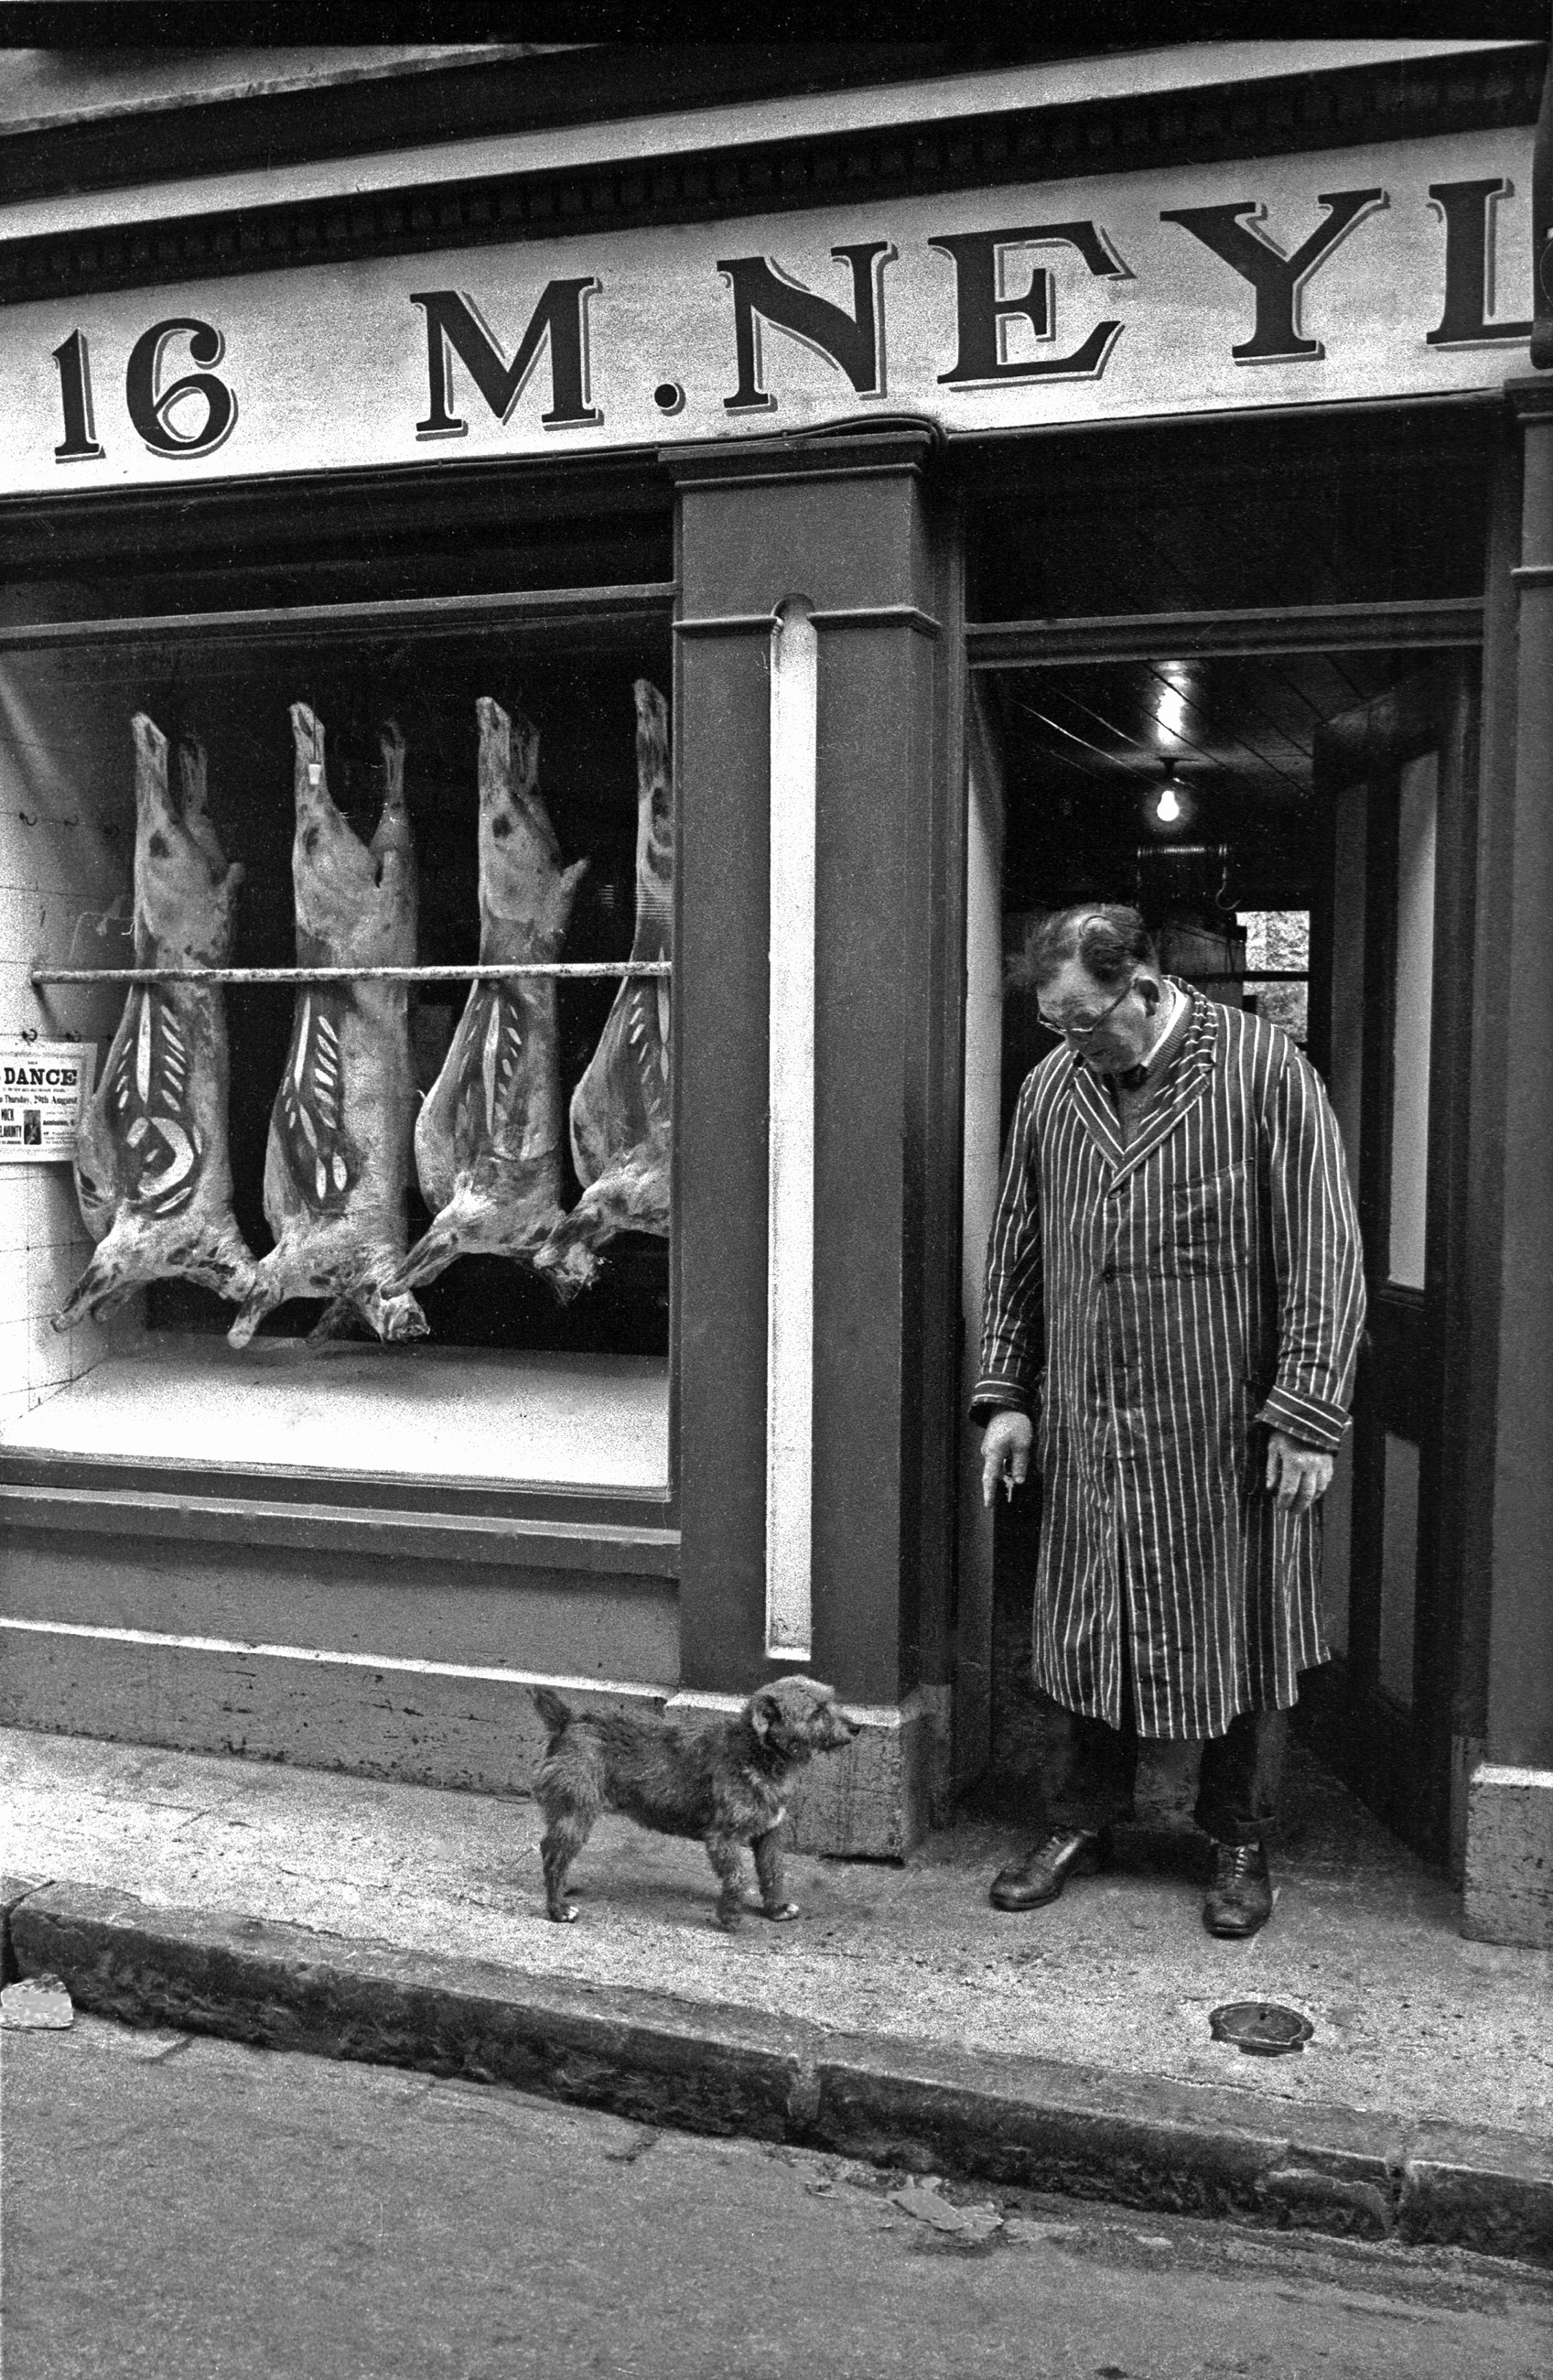 The butcher of Ennis, Ireland, and his dog. 1963.